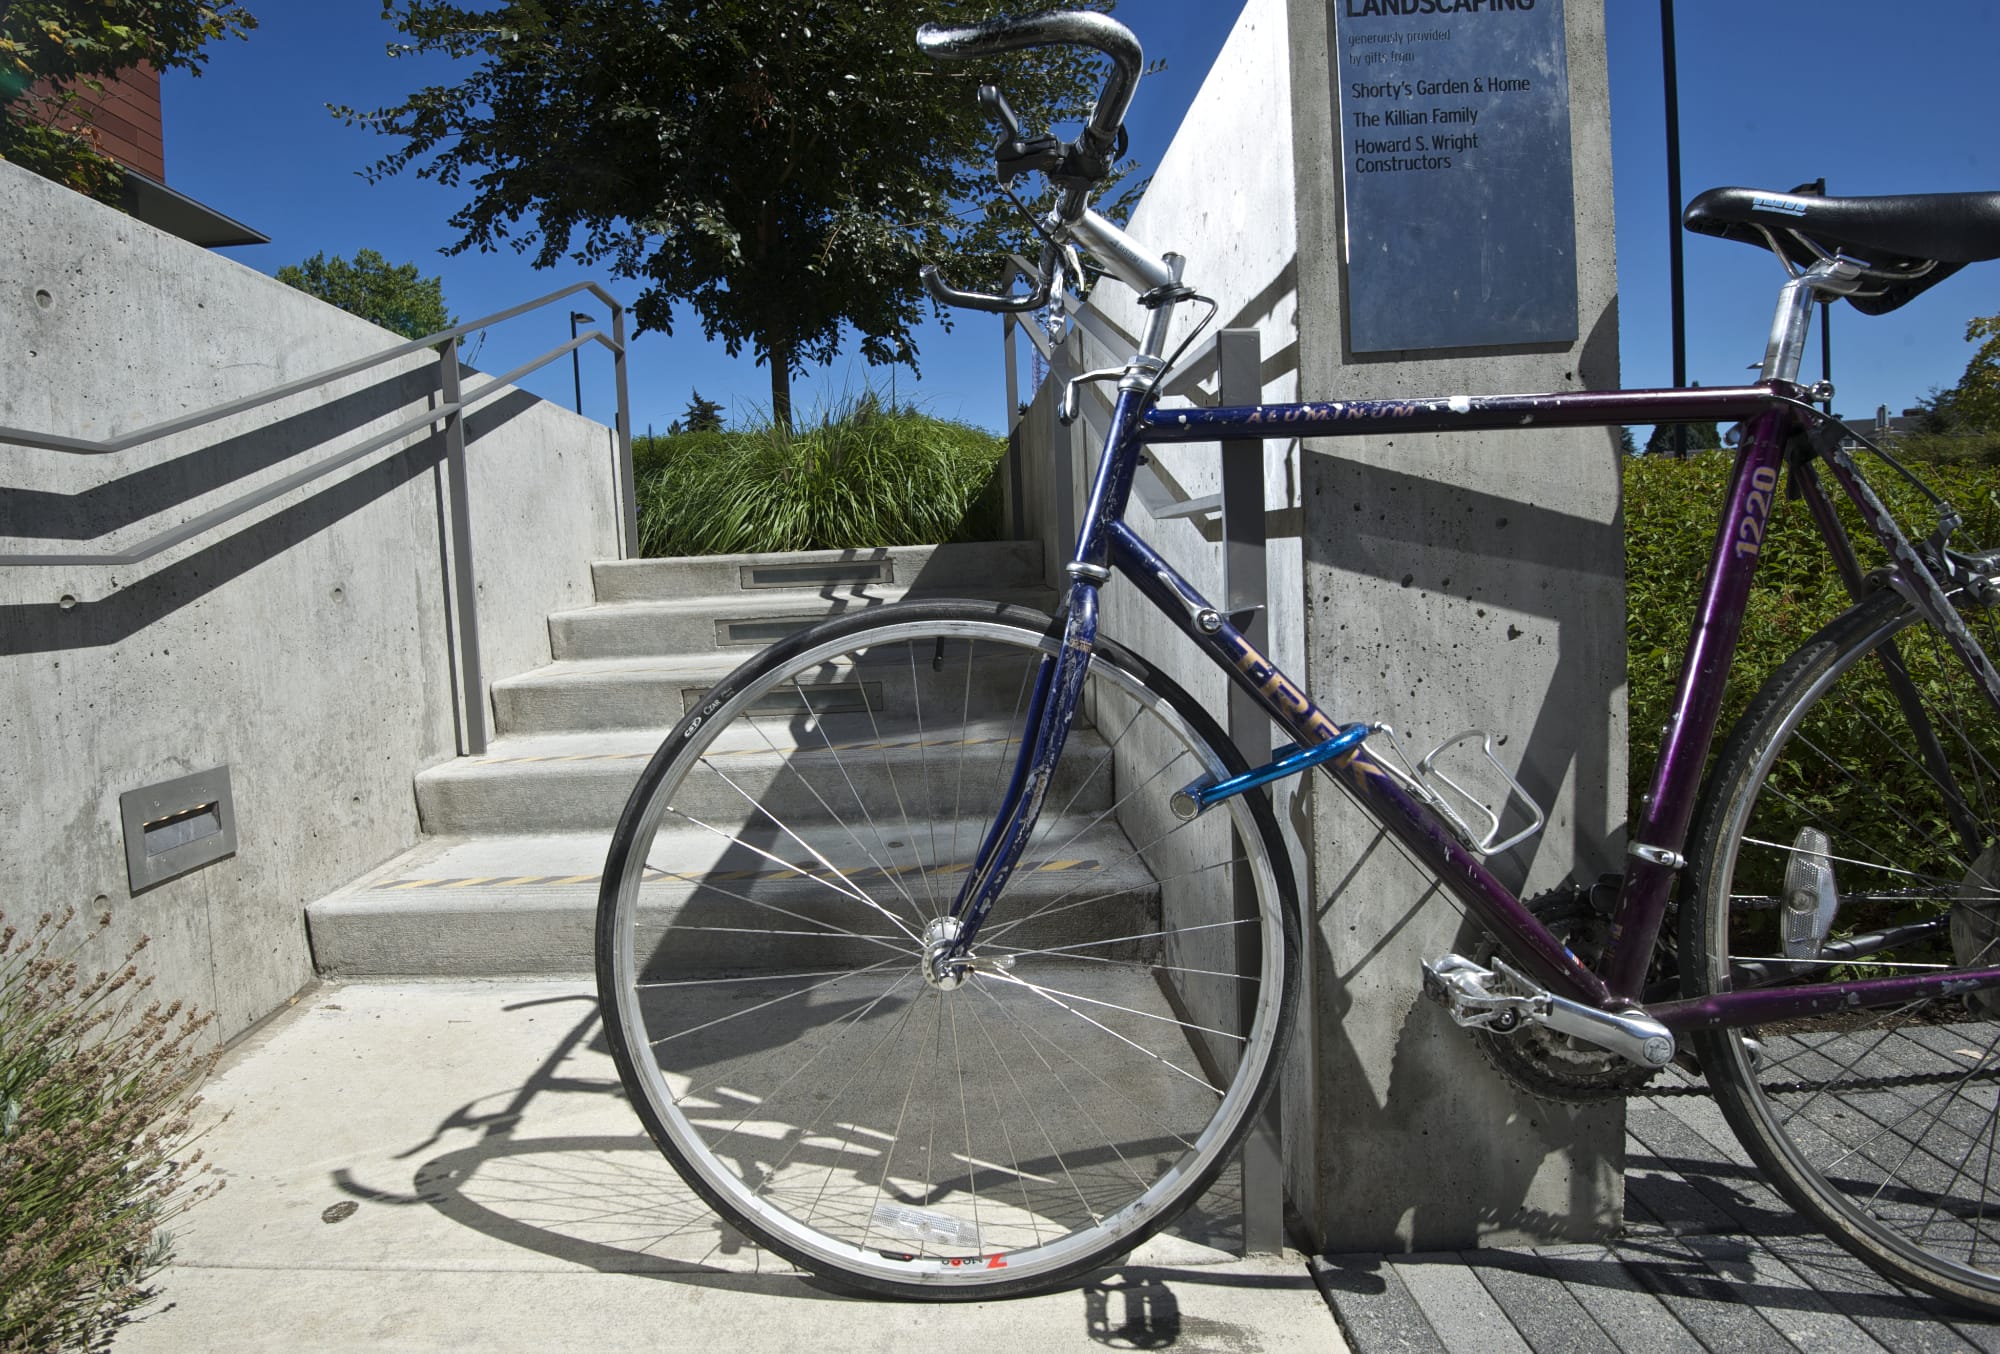 A bicycle sits locked up outside the Vancouver Community Library in downtown Vancouver.